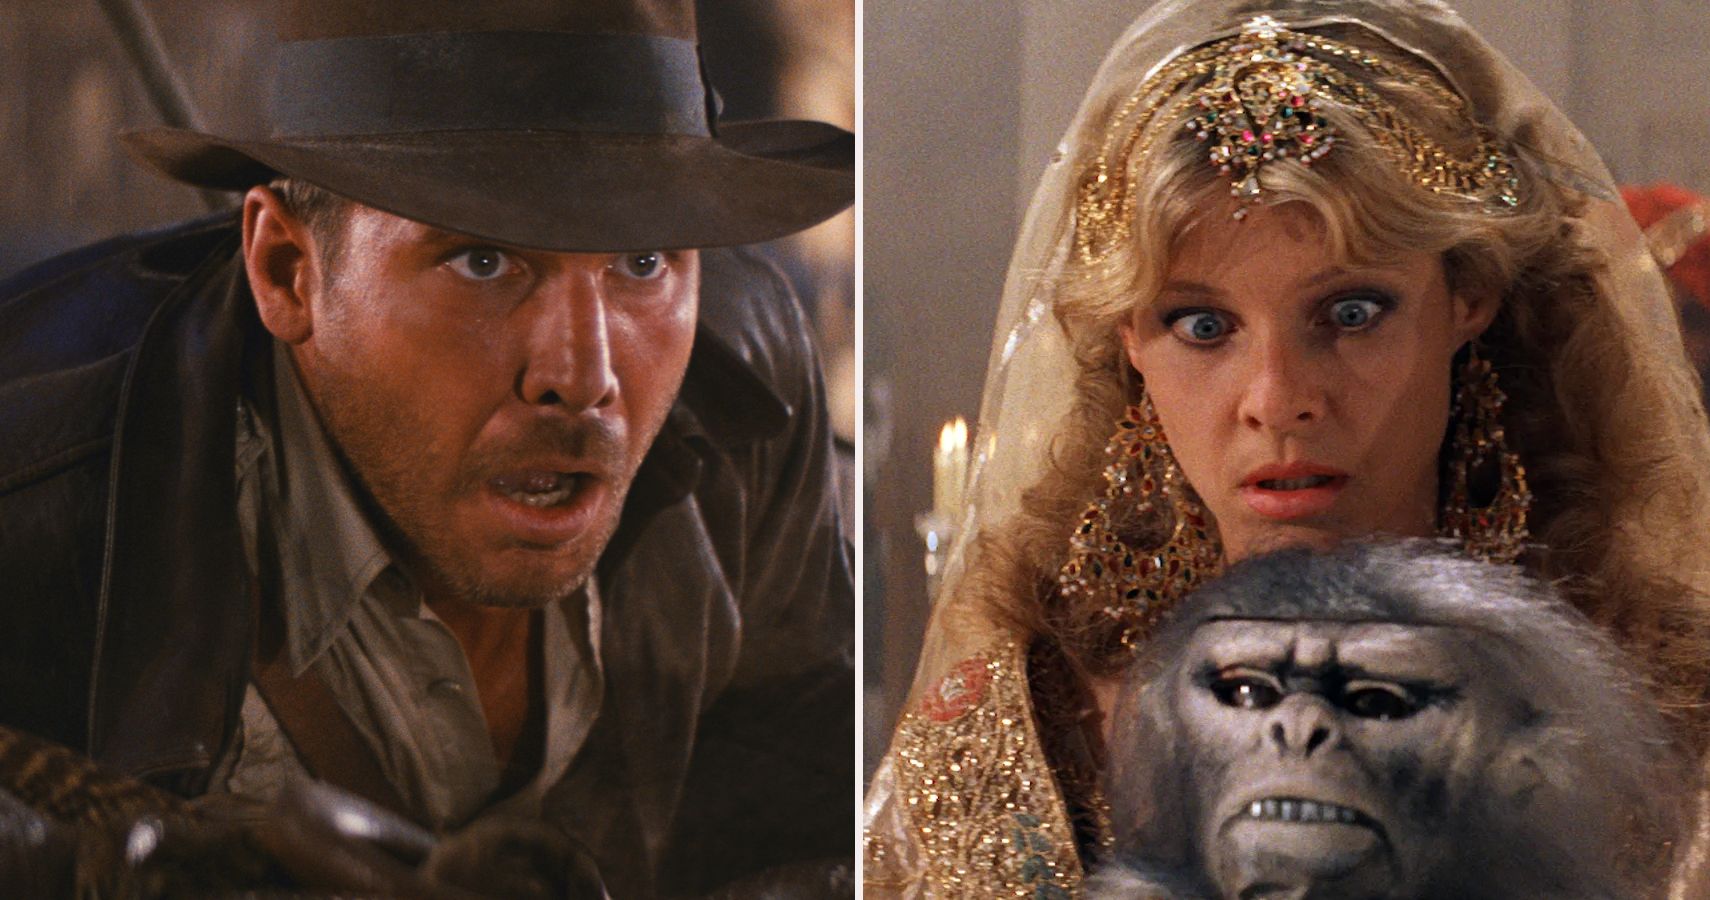 10 Things From The Original Indiana Jones Movies That Haven't Aged Well